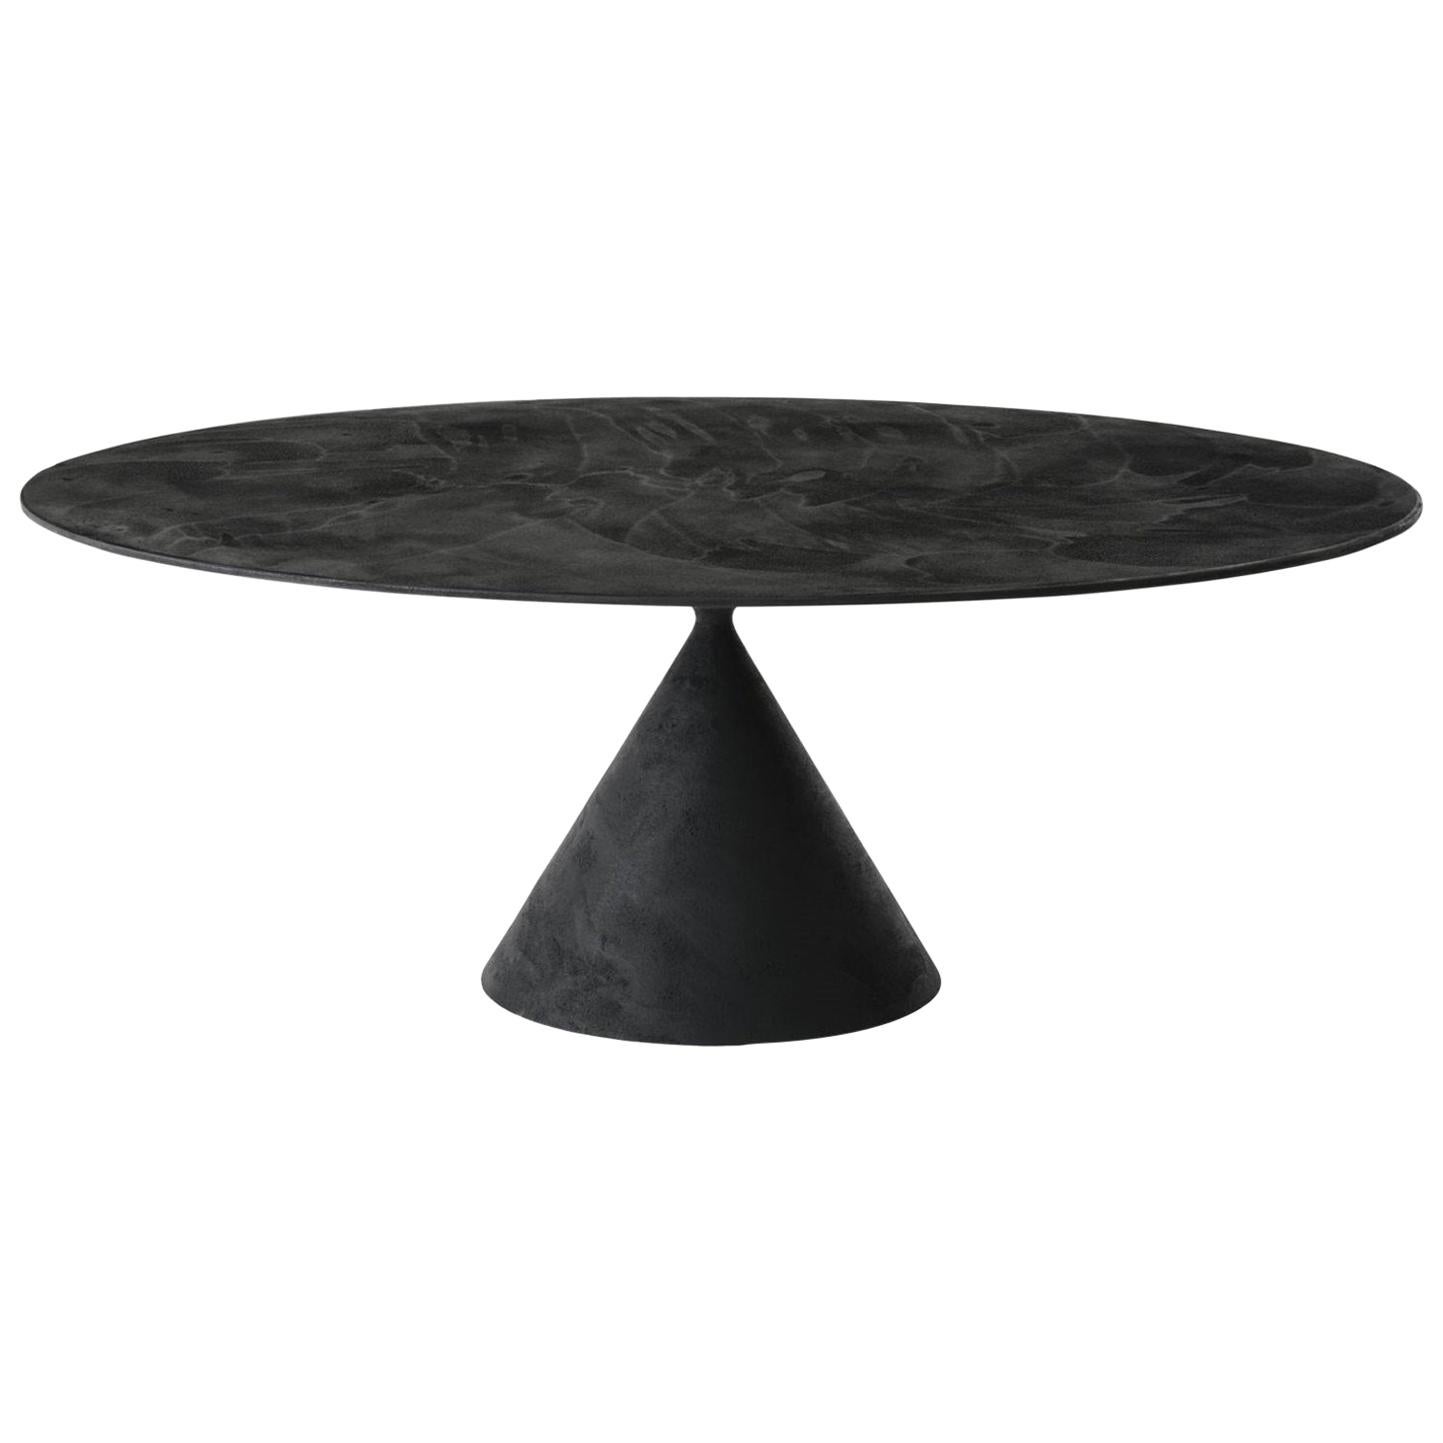 Desalto Clay Table Designed by Marc Krusin